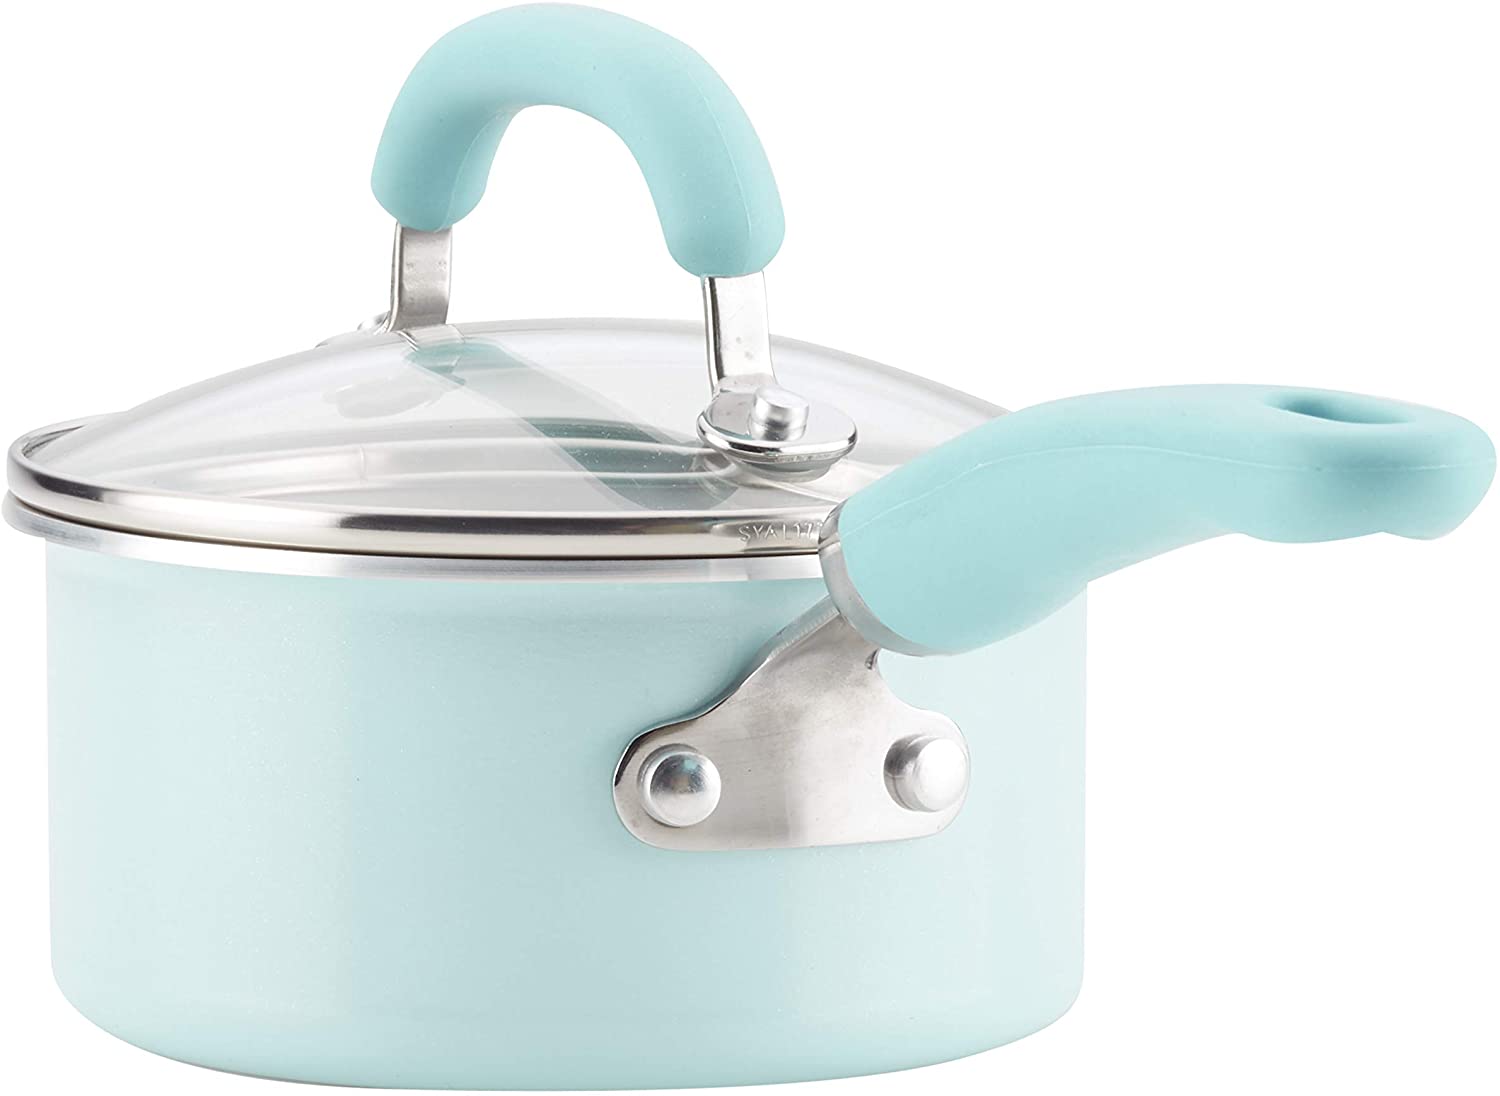  Rachael Ray Create Delicious Nonstick Cookware Pots and Pans Set,  13 Piece, Light Blue Shimmer: Home & Kitchen